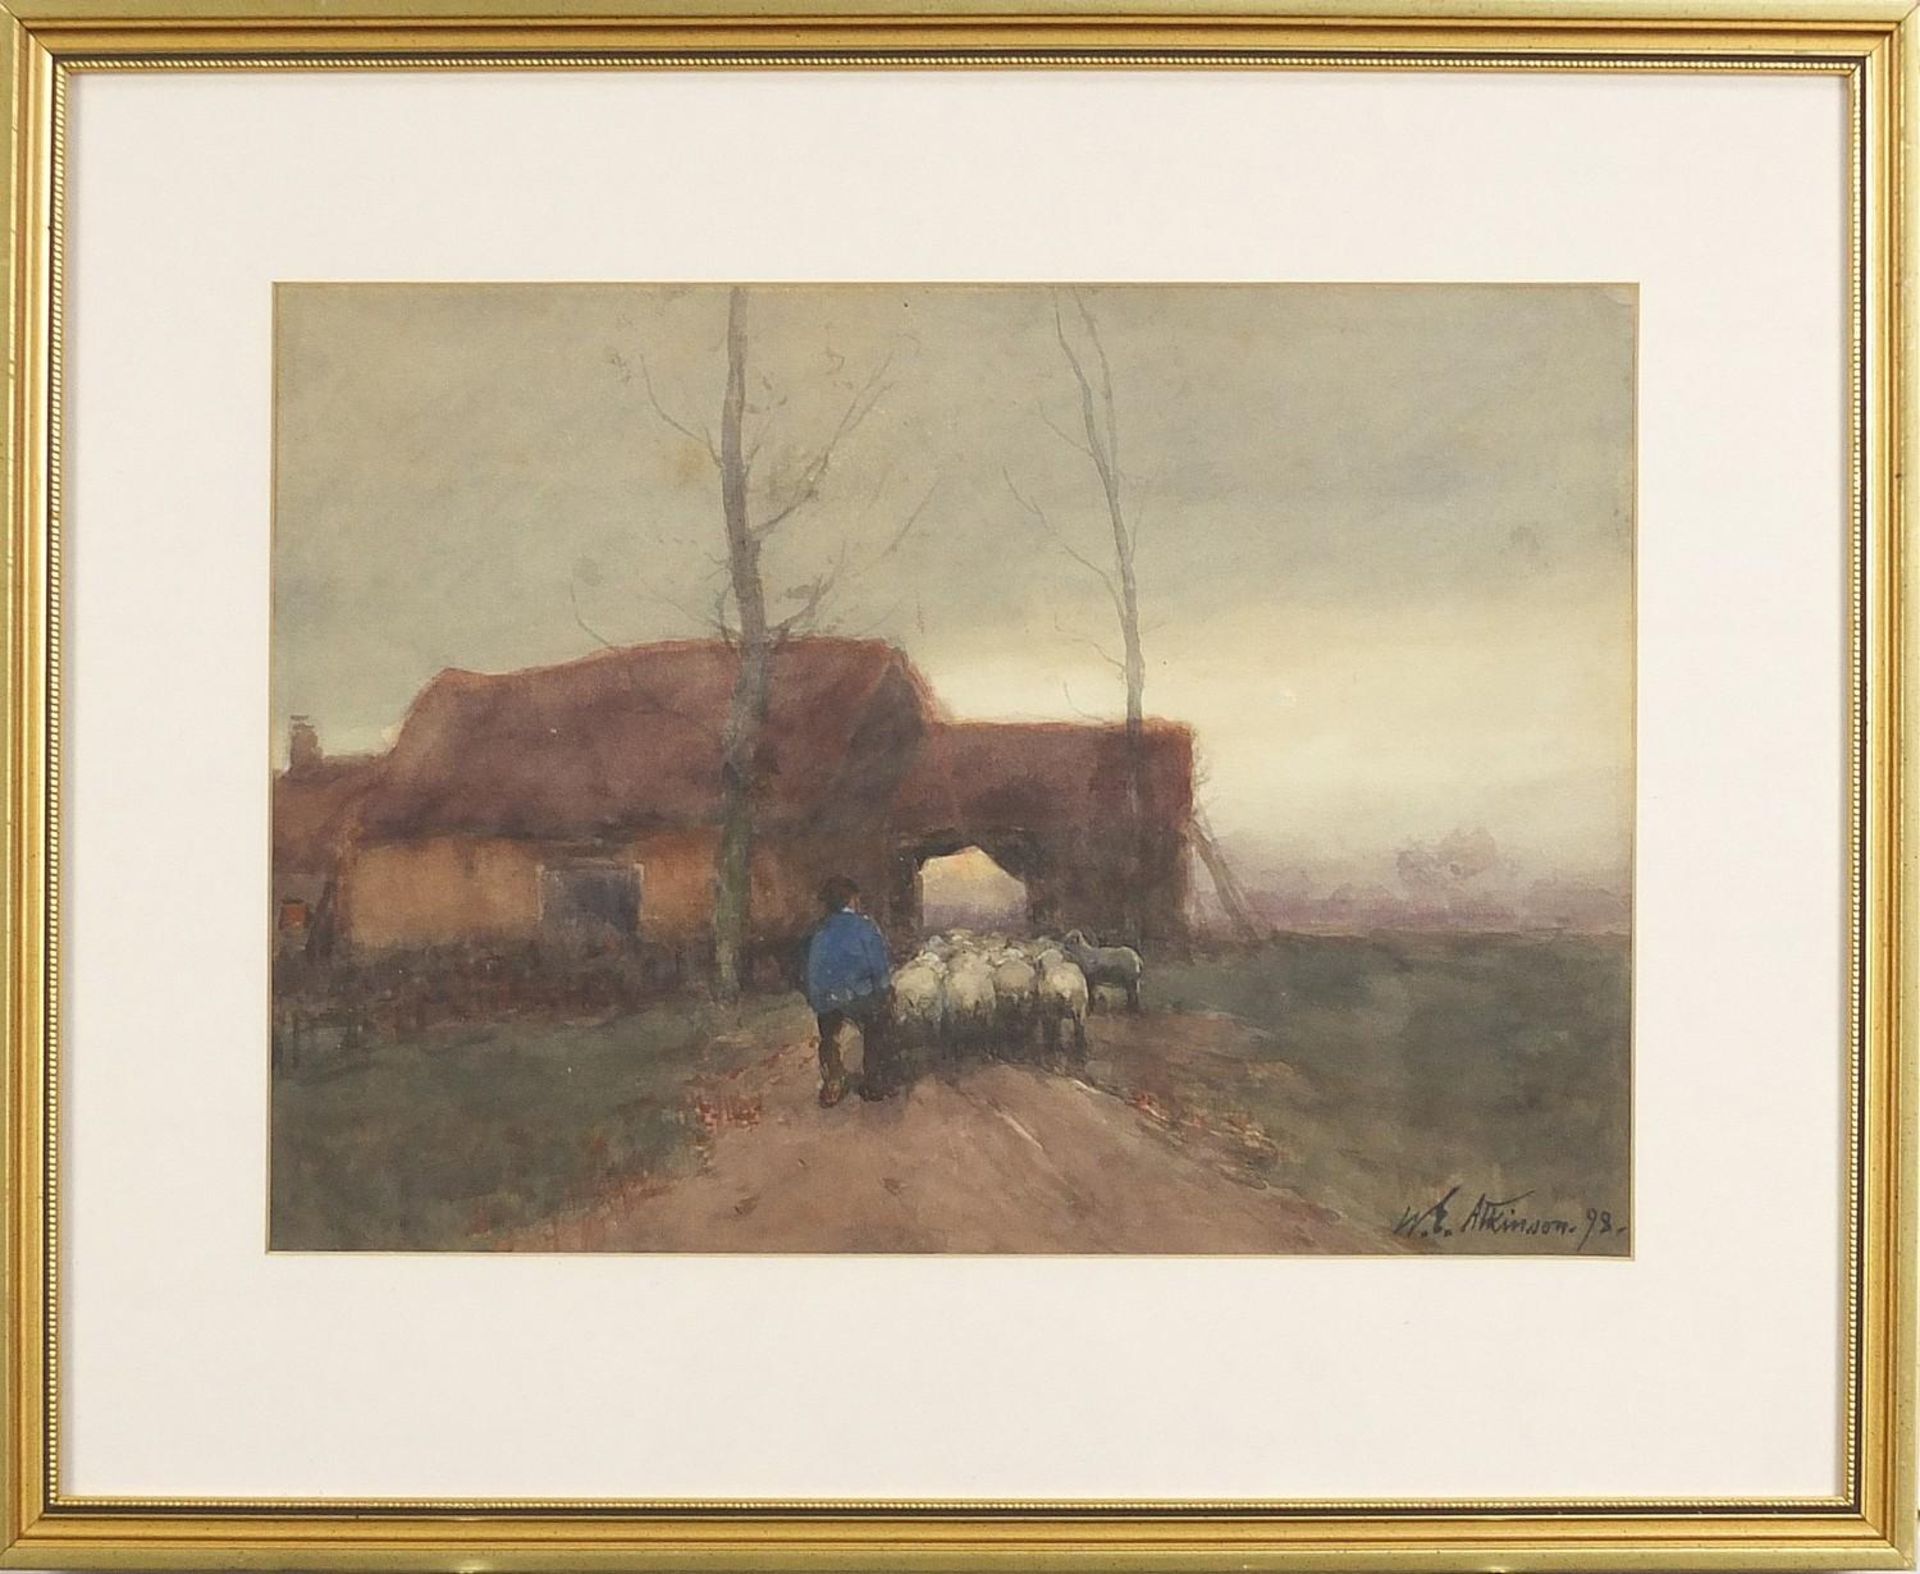 William Edwin Atkinson 1898 - Shepherd and sheep coming home, signed watercolour, mounted, framed - Image 2 of 4